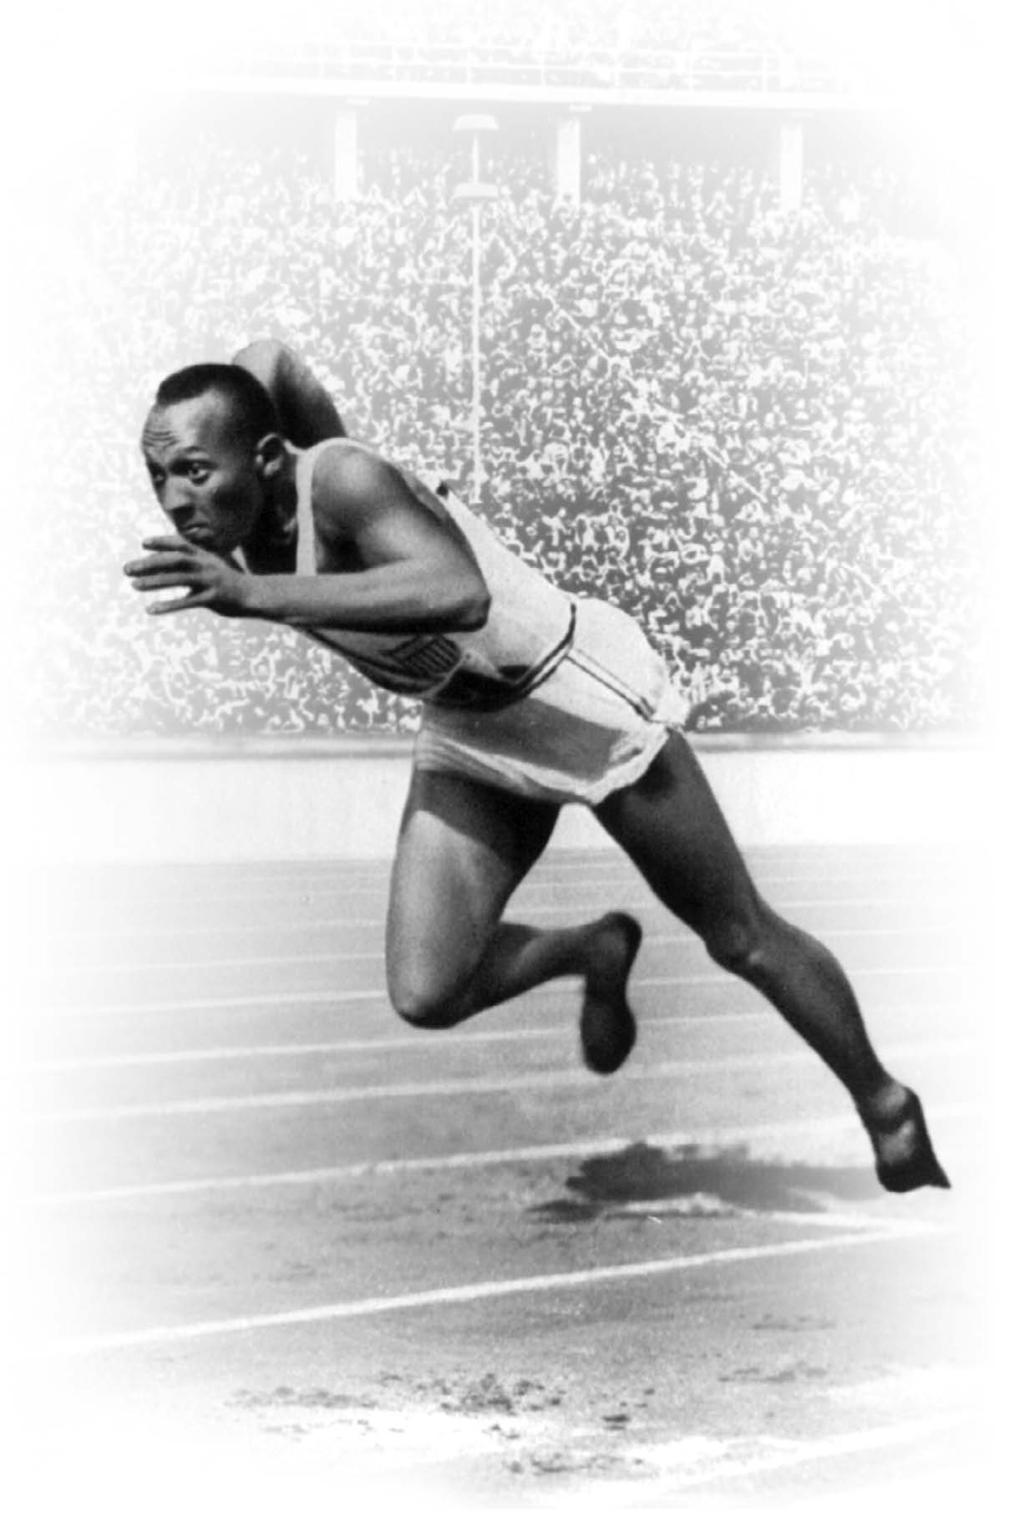 In ancient times, the sports not only were fun, but also developed a warrior s skills for battle. Jesse Owens, an Olympic runner, begins a race.